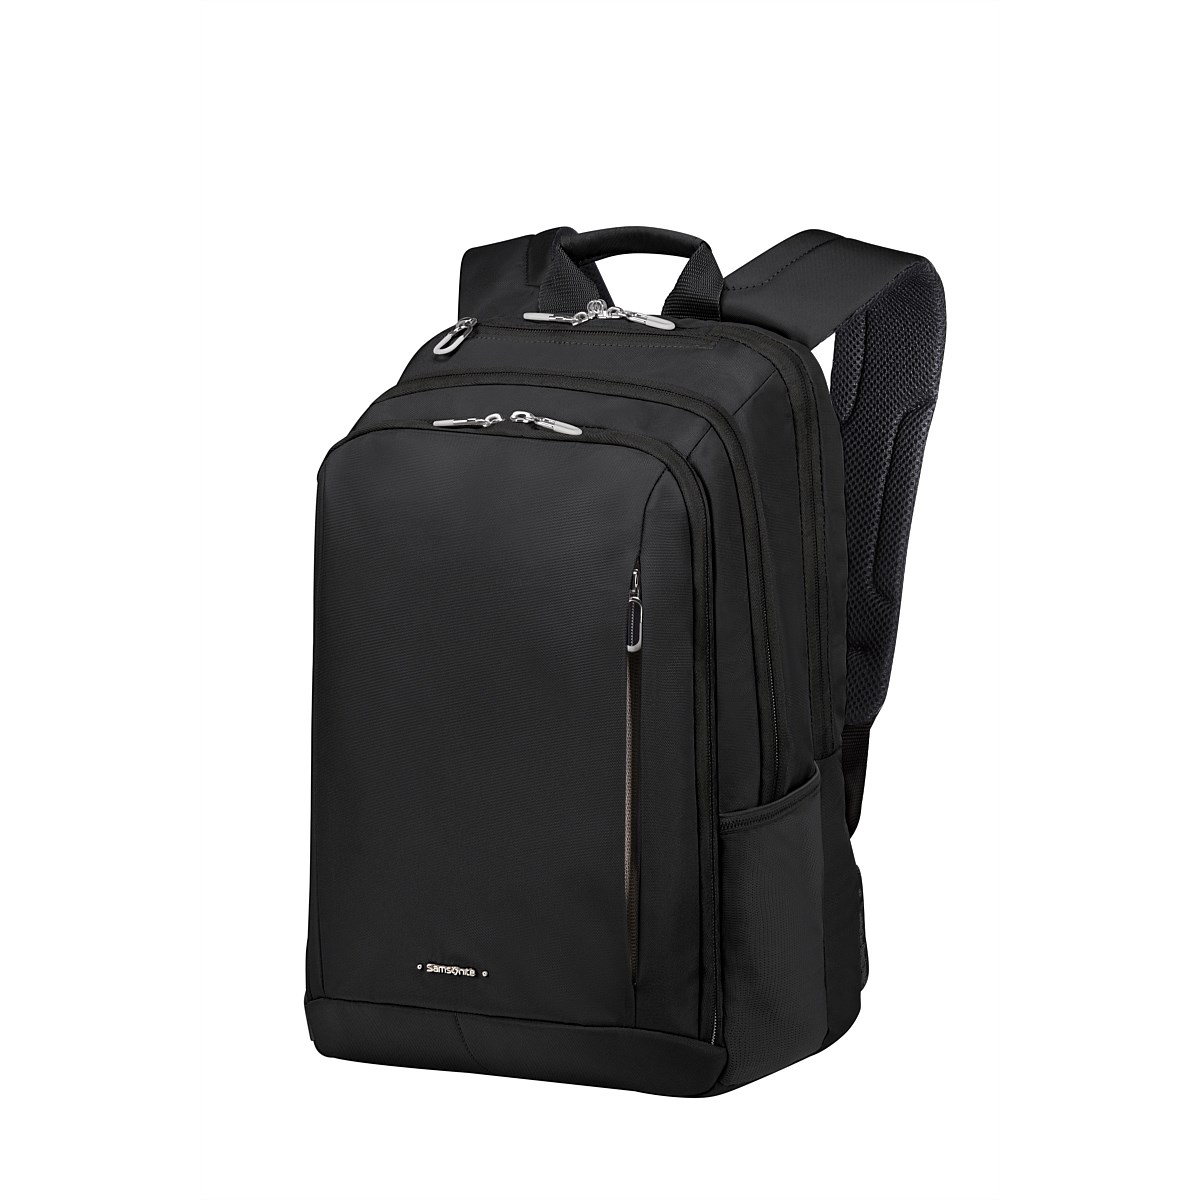 Luxury Luggage Online | Air New Zealand's Airpoints™ Store